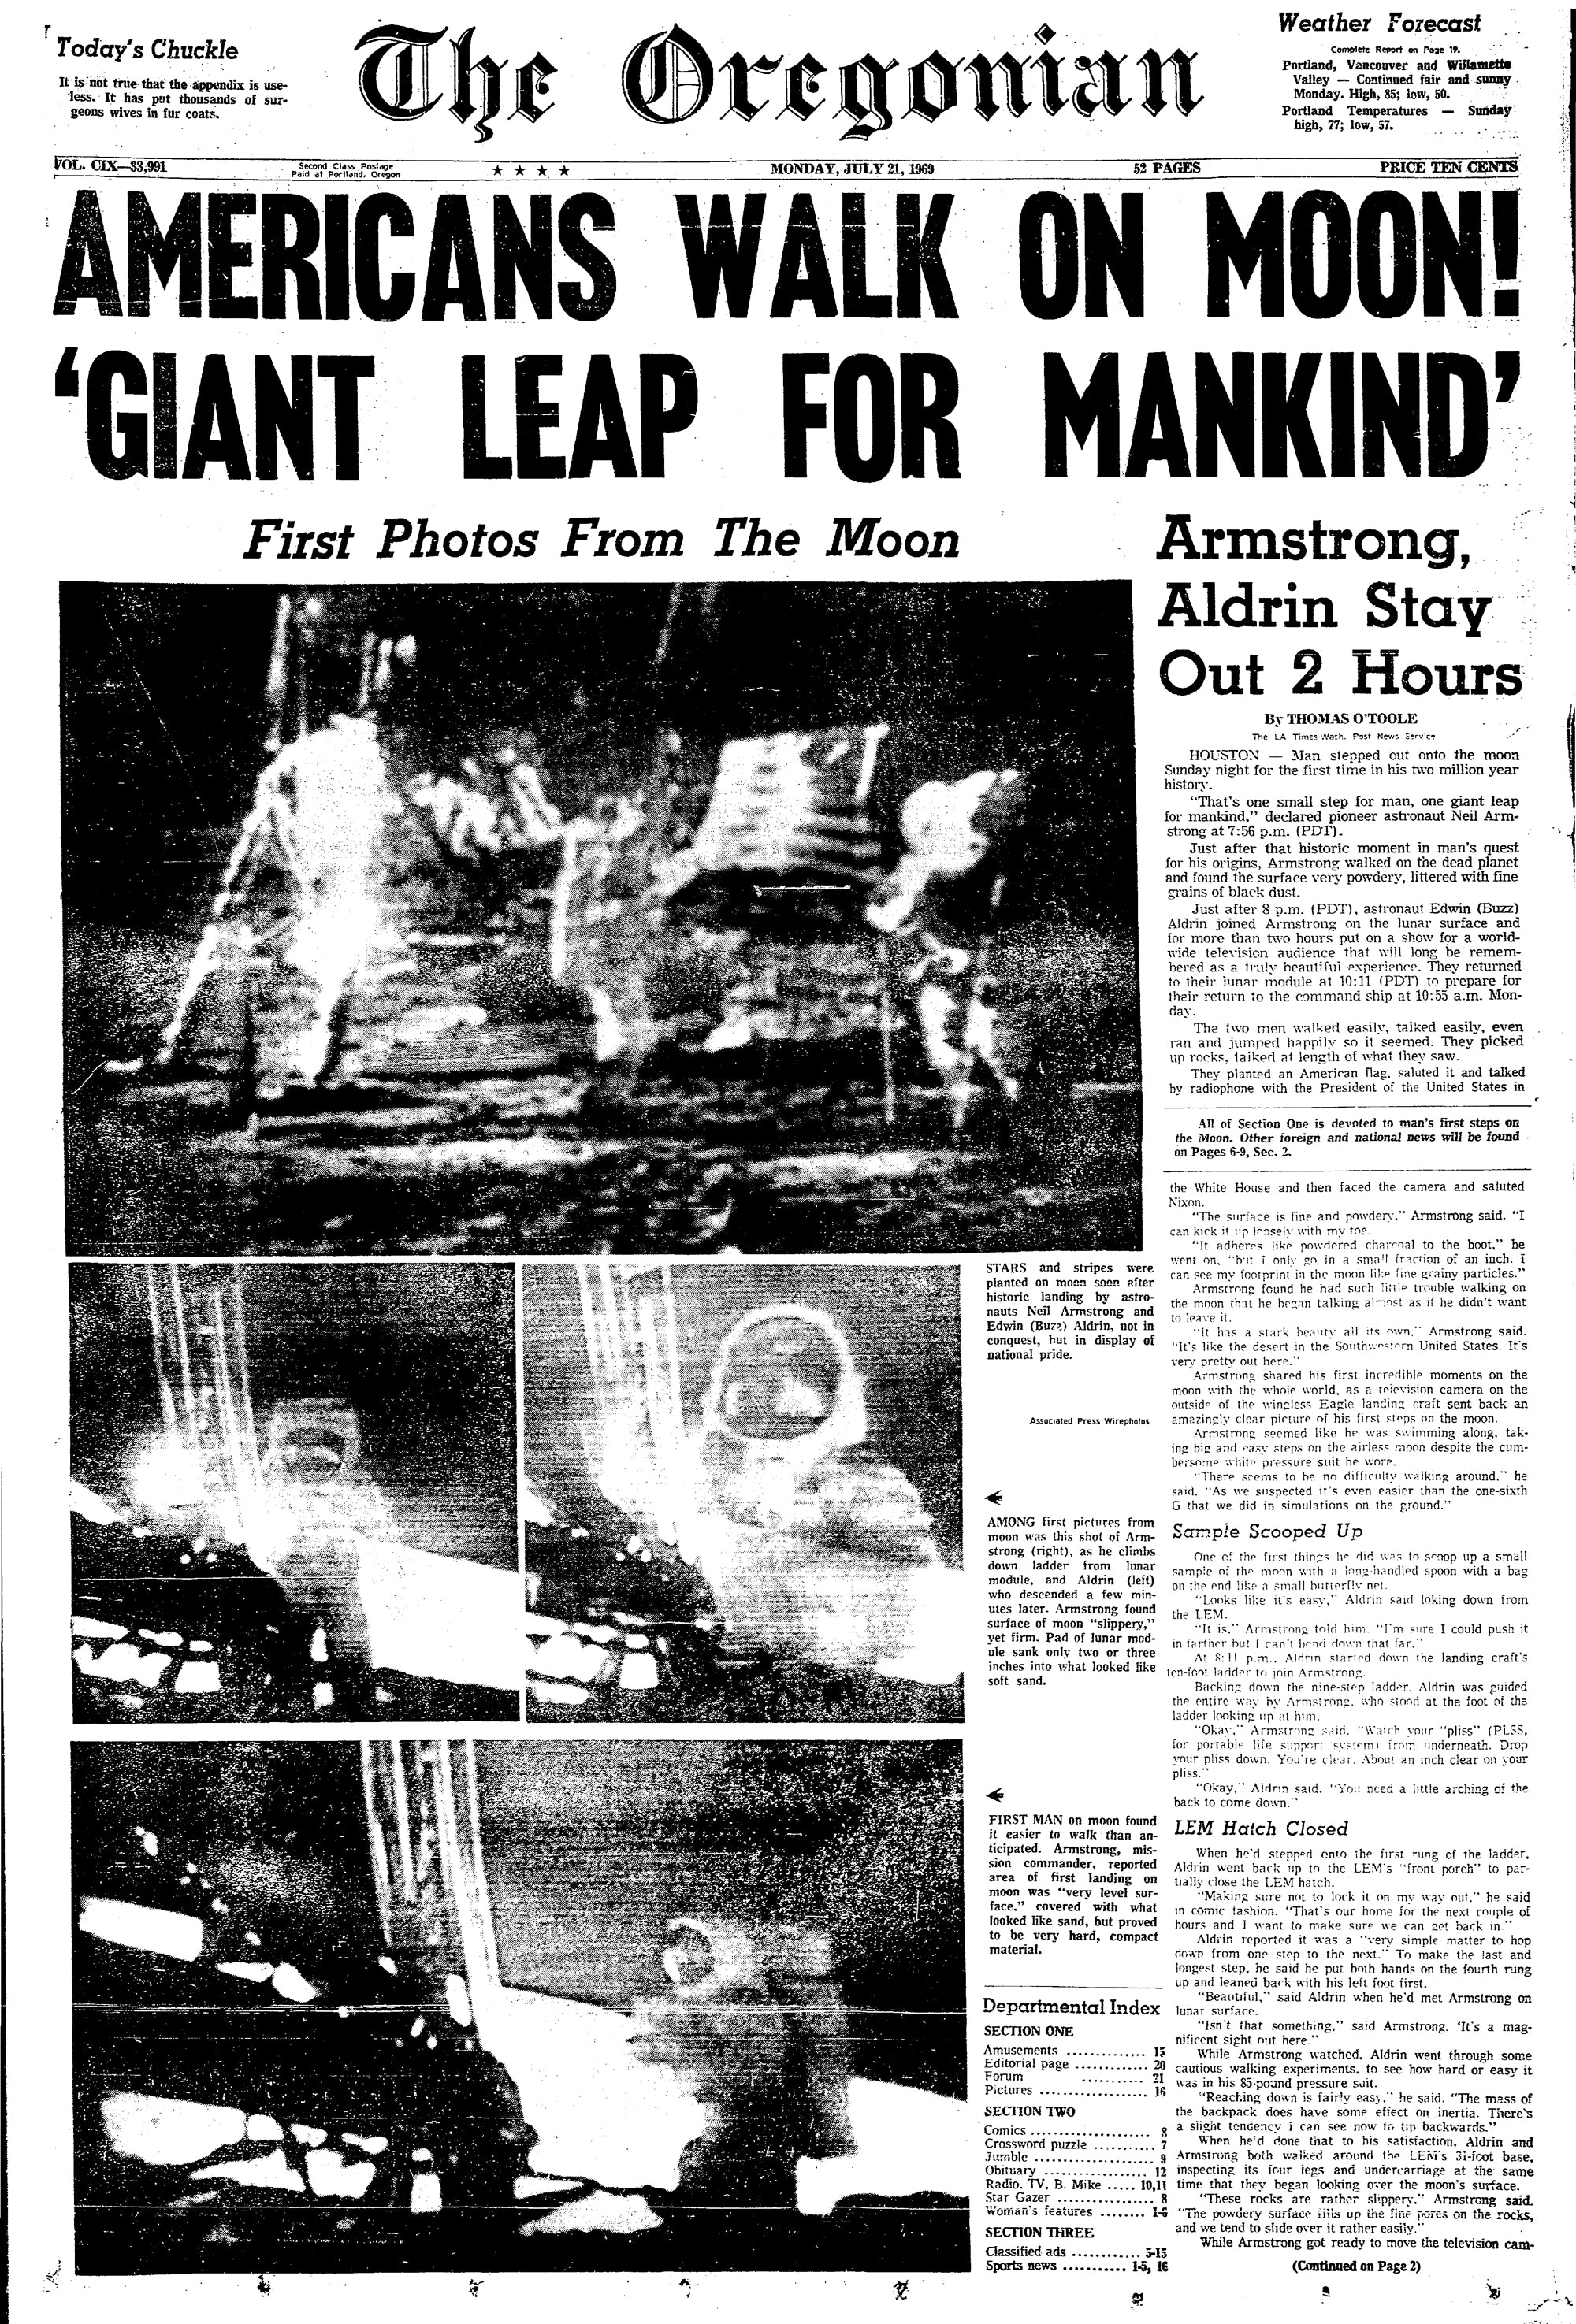 Commemorative Oregonian Front Page - Americans Walk on Moon!